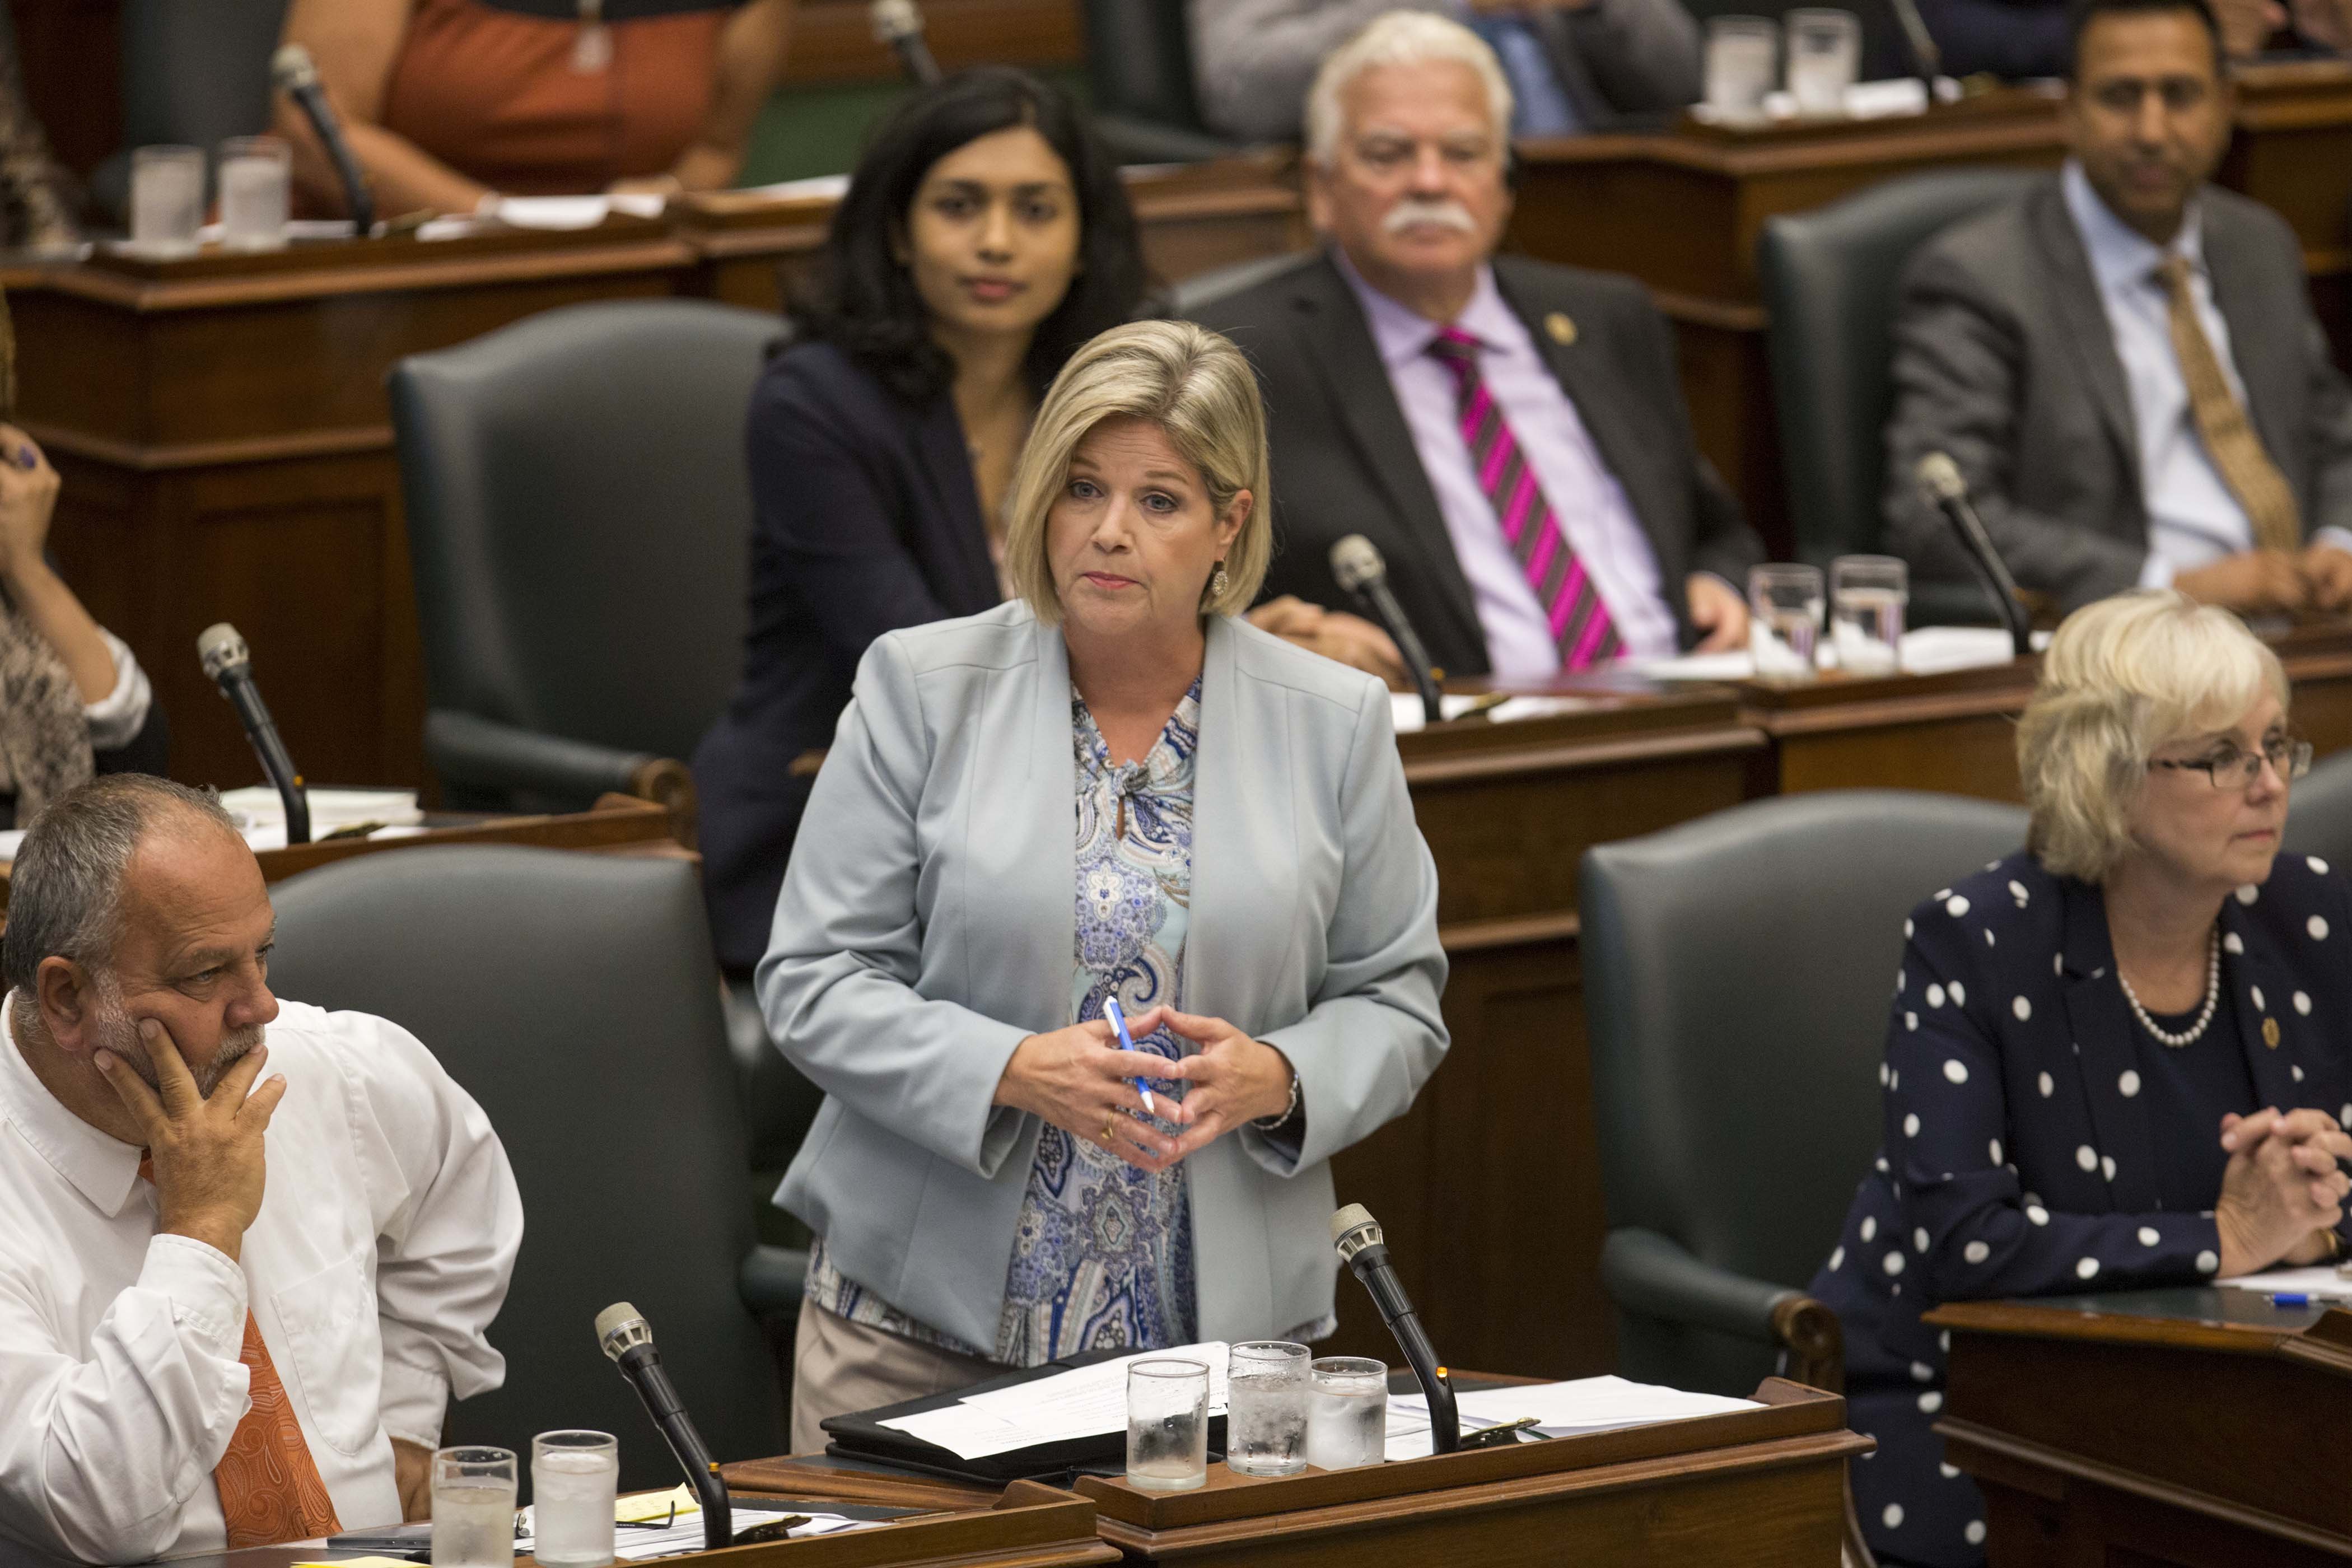 NDP calls for 'independent judicial inquiry' into province's COVID-19 response